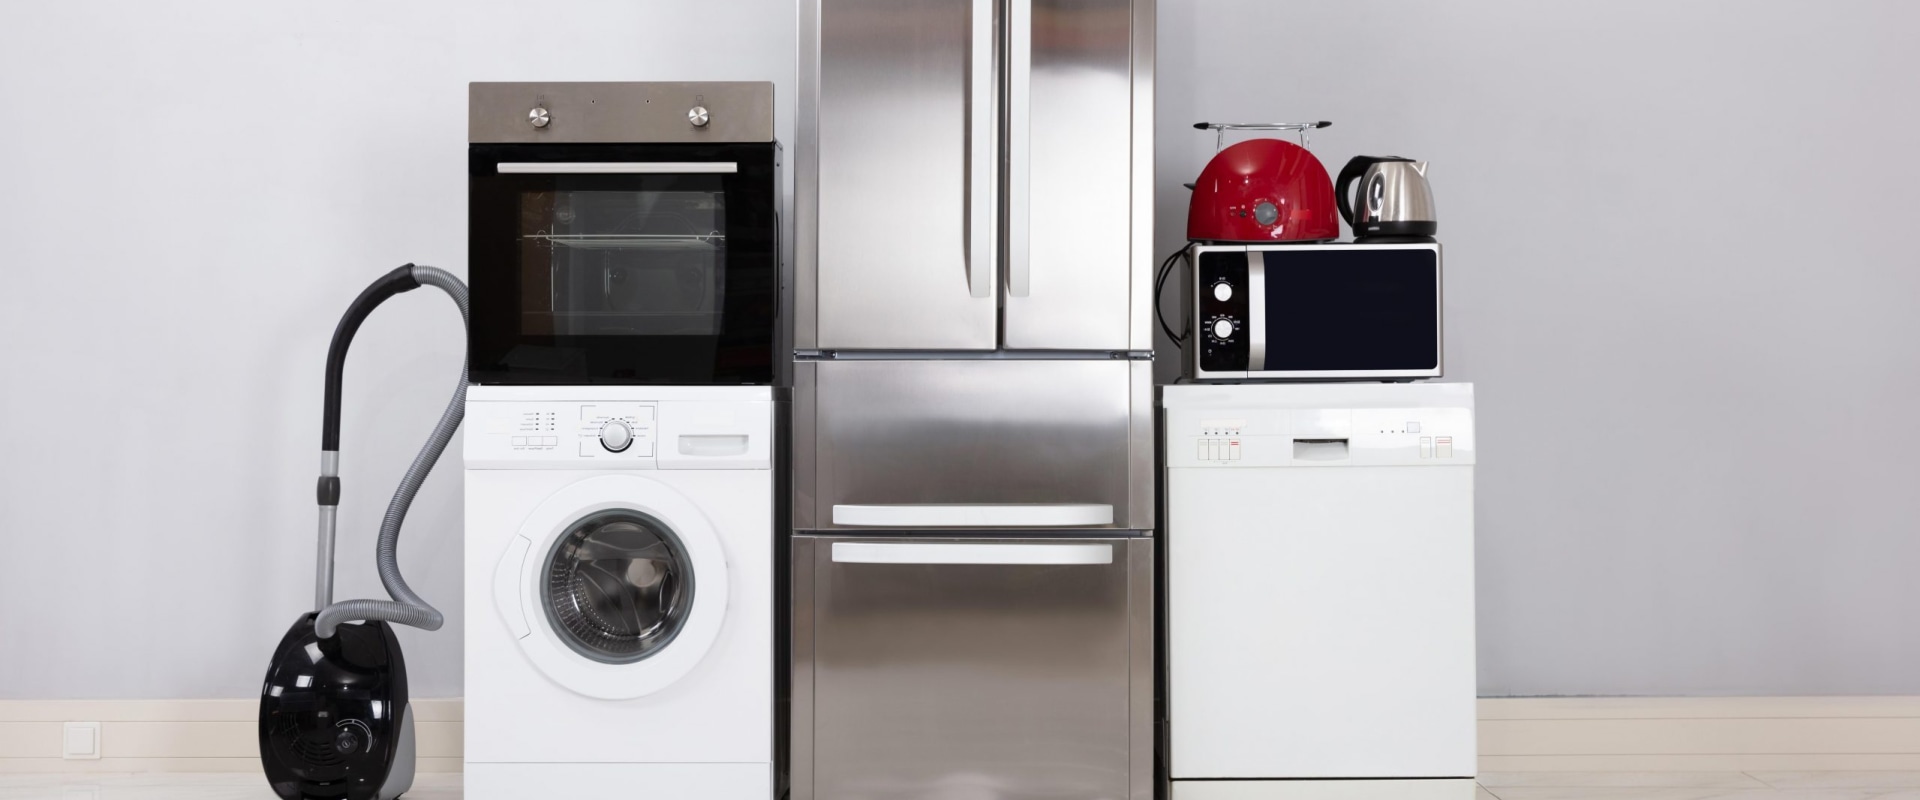 What appliances that are commonly used at home?